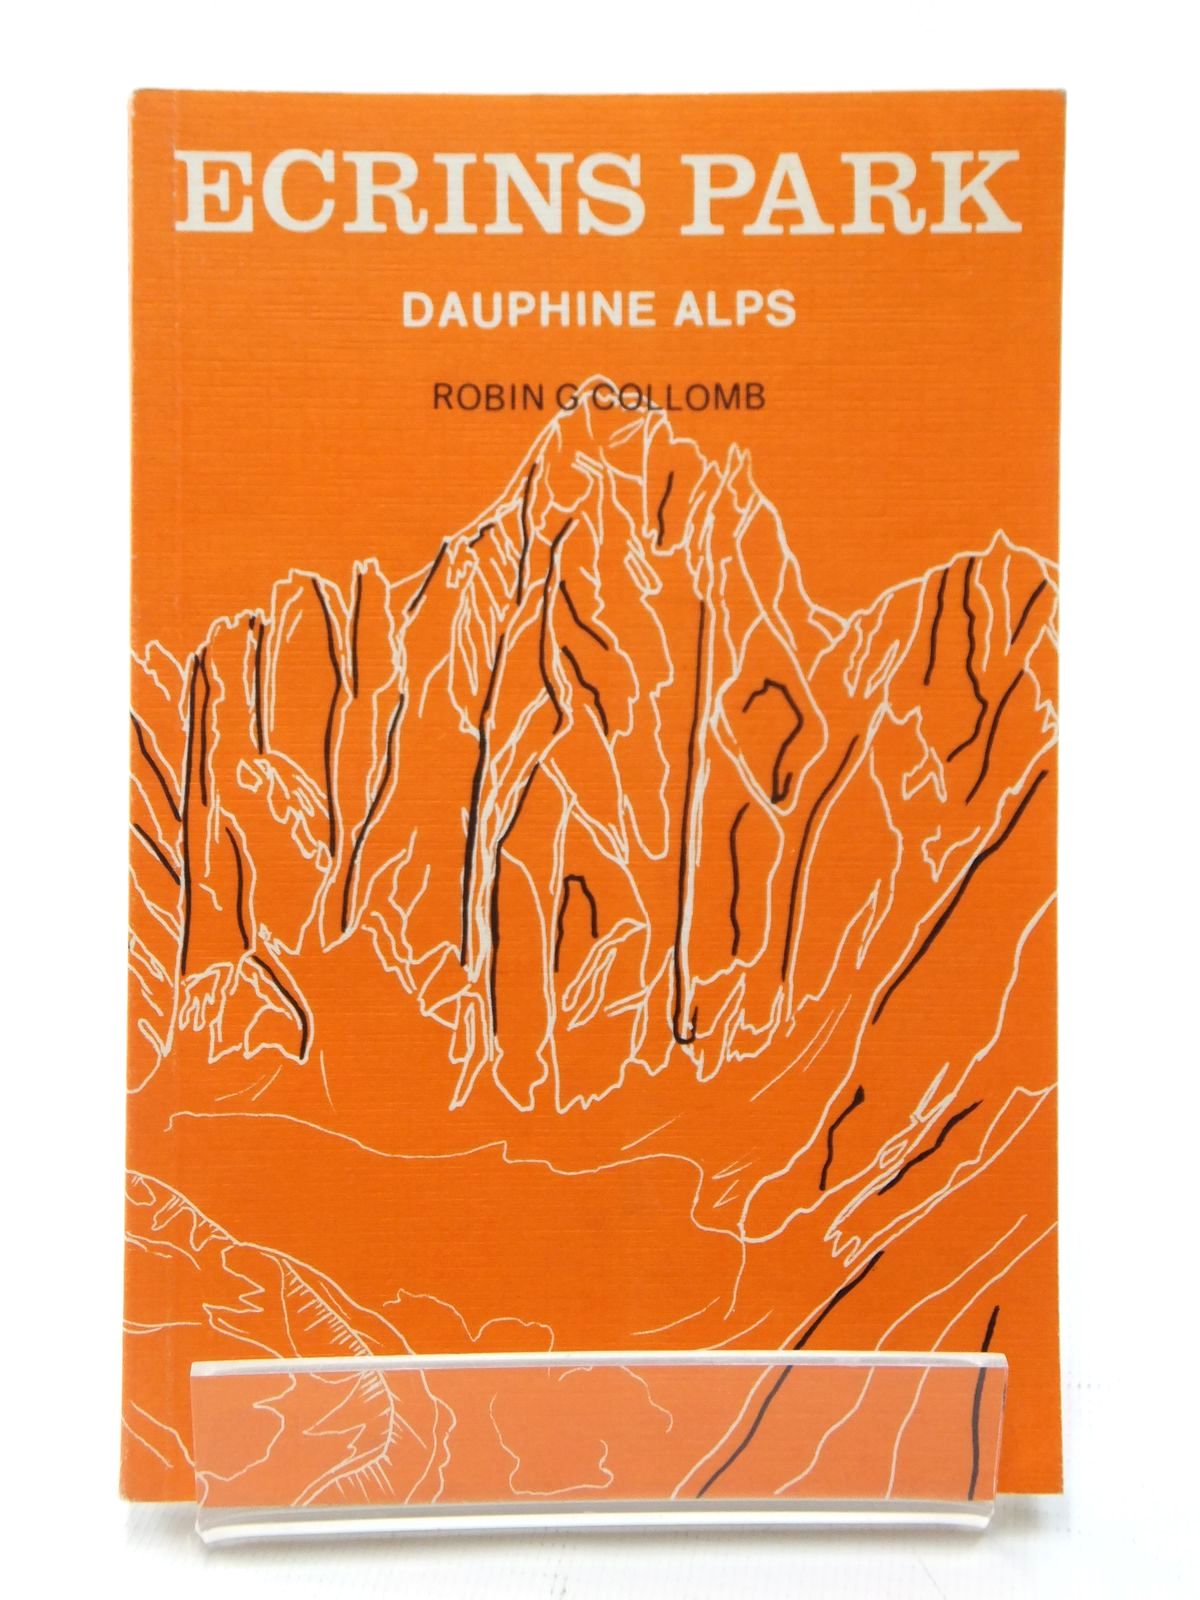 Photo of ECRINS PARK DAUPHINE ALPS written by Collomb, Robin G. published by West Col Productions (STOCK CODE: 2122448)  for sale by Stella & Rose's Books